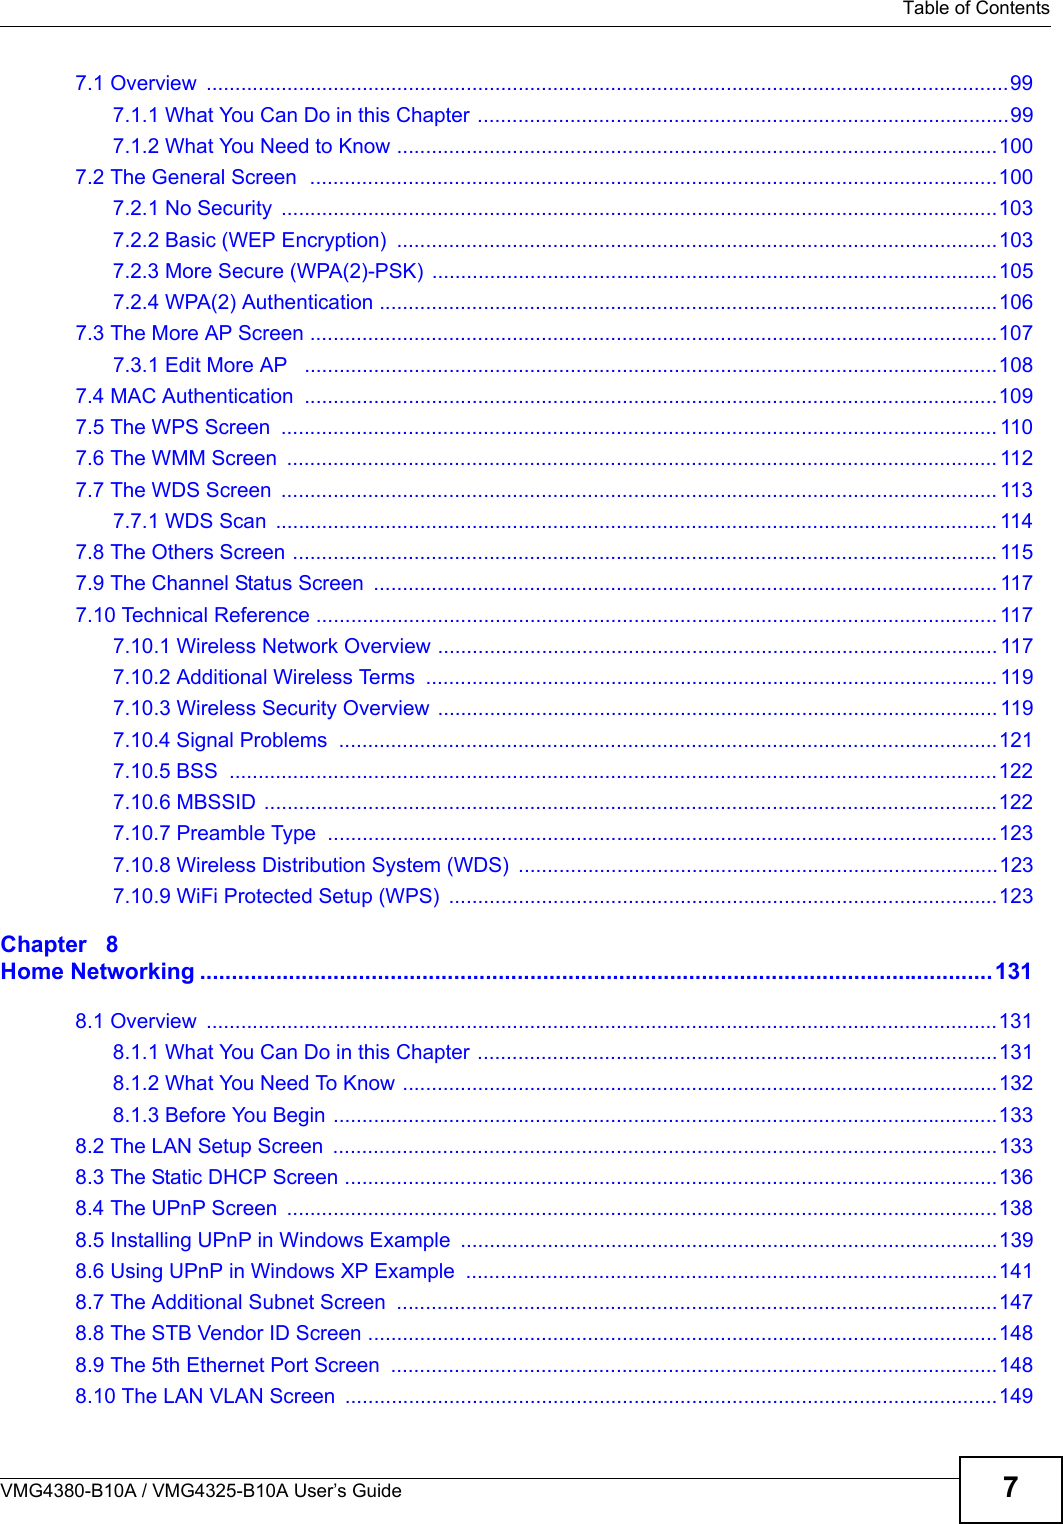 Table of ContentsVMG4380-B10A / VMG4325-B10A User’s Guide 77.1 Overview  ...........................................................................................................................................997.1.1 What You Can Do in this Chapter ............................................................................................997.1.2 What You Need to Know ........................................................................................................1007.2 The General Screen  .......................................................................................................................1007.2.1 No Security ............................................................................................................................1037.2.2 Basic (WEP Encryption)  ........................................................................................................1037.2.3 More Secure (WPA(2)-PSK)  ..................................................................................................1057.2.4 WPA(2) Authentication ...........................................................................................................1067.3 The More AP Screen .......................................................................................................................1077.3.1 Edit More AP  ........................................................................................................................1087.4 MAC Authentication  ........................................................................................................................1097.5 The WPS Screen  ............................................................................................................................ 1107.6 The WMM Screen  ........................................................................................................................... 1127.7 The WDS Screen  ............................................................................................................................ 1137.7.1 WDS Scan  ............................................................................................................................. 1147.8 The Others Screen .......................................................................................................................... 1157.9 The Channel Status Screen  ............................................................................................................ 1177.10 Technical Reference ...................................................................................................................... 1177.10.1 Wireless Network Overview ................................................................................................. 1177.10.2 Additional Wireless Terms  ................................................................................................... 1197.10.3 Wireless Security Overview  ................................................................................................. 1197.10.4 Signal Problems  ..................................................................................................................1217.10.5 BSS .....................................................................................................................................1227.10.6 MBSSID ...............................................................................................................................1227.10.7 Preamble Type  ....................................................................................................................1237.10.8 Wireless Distribution System (WDS)  ...................................................................................1237.10.9 WiFi Protected Setup (WPS)  ...............................................................................................123Chapter   8Home Networking .............................................................................................................................1318.1 Overview  .........................................................................................................................................1318.1.1 What You Can Do in this Chapter ..........................................................................................1318.1.2 What You Need To Know .......................................................................................................1328.1.3 Before You Begin ...................................................................................................................1338.2 The LAN Setup Screen  ...................................................................................................................1338.3 The Static DHCP Screen .................................................................................................................1368.4 The UPnP Screen  ...........................................................................................................................1388.5 Installing UPnP in Windows Example  .............................................................................................1398.6 Using UPnP in Windows XP Example  ............................................................................................1418.7 The Additional Subnet Screen  ........................................................................................................1478.8 The STB Vendor ID Screen .............................................................................................................1488.9 The 5th Ethernet Port Screen  .........................................................................................................1488.10 The LAN VLAN Screen  .................................................................................................................149